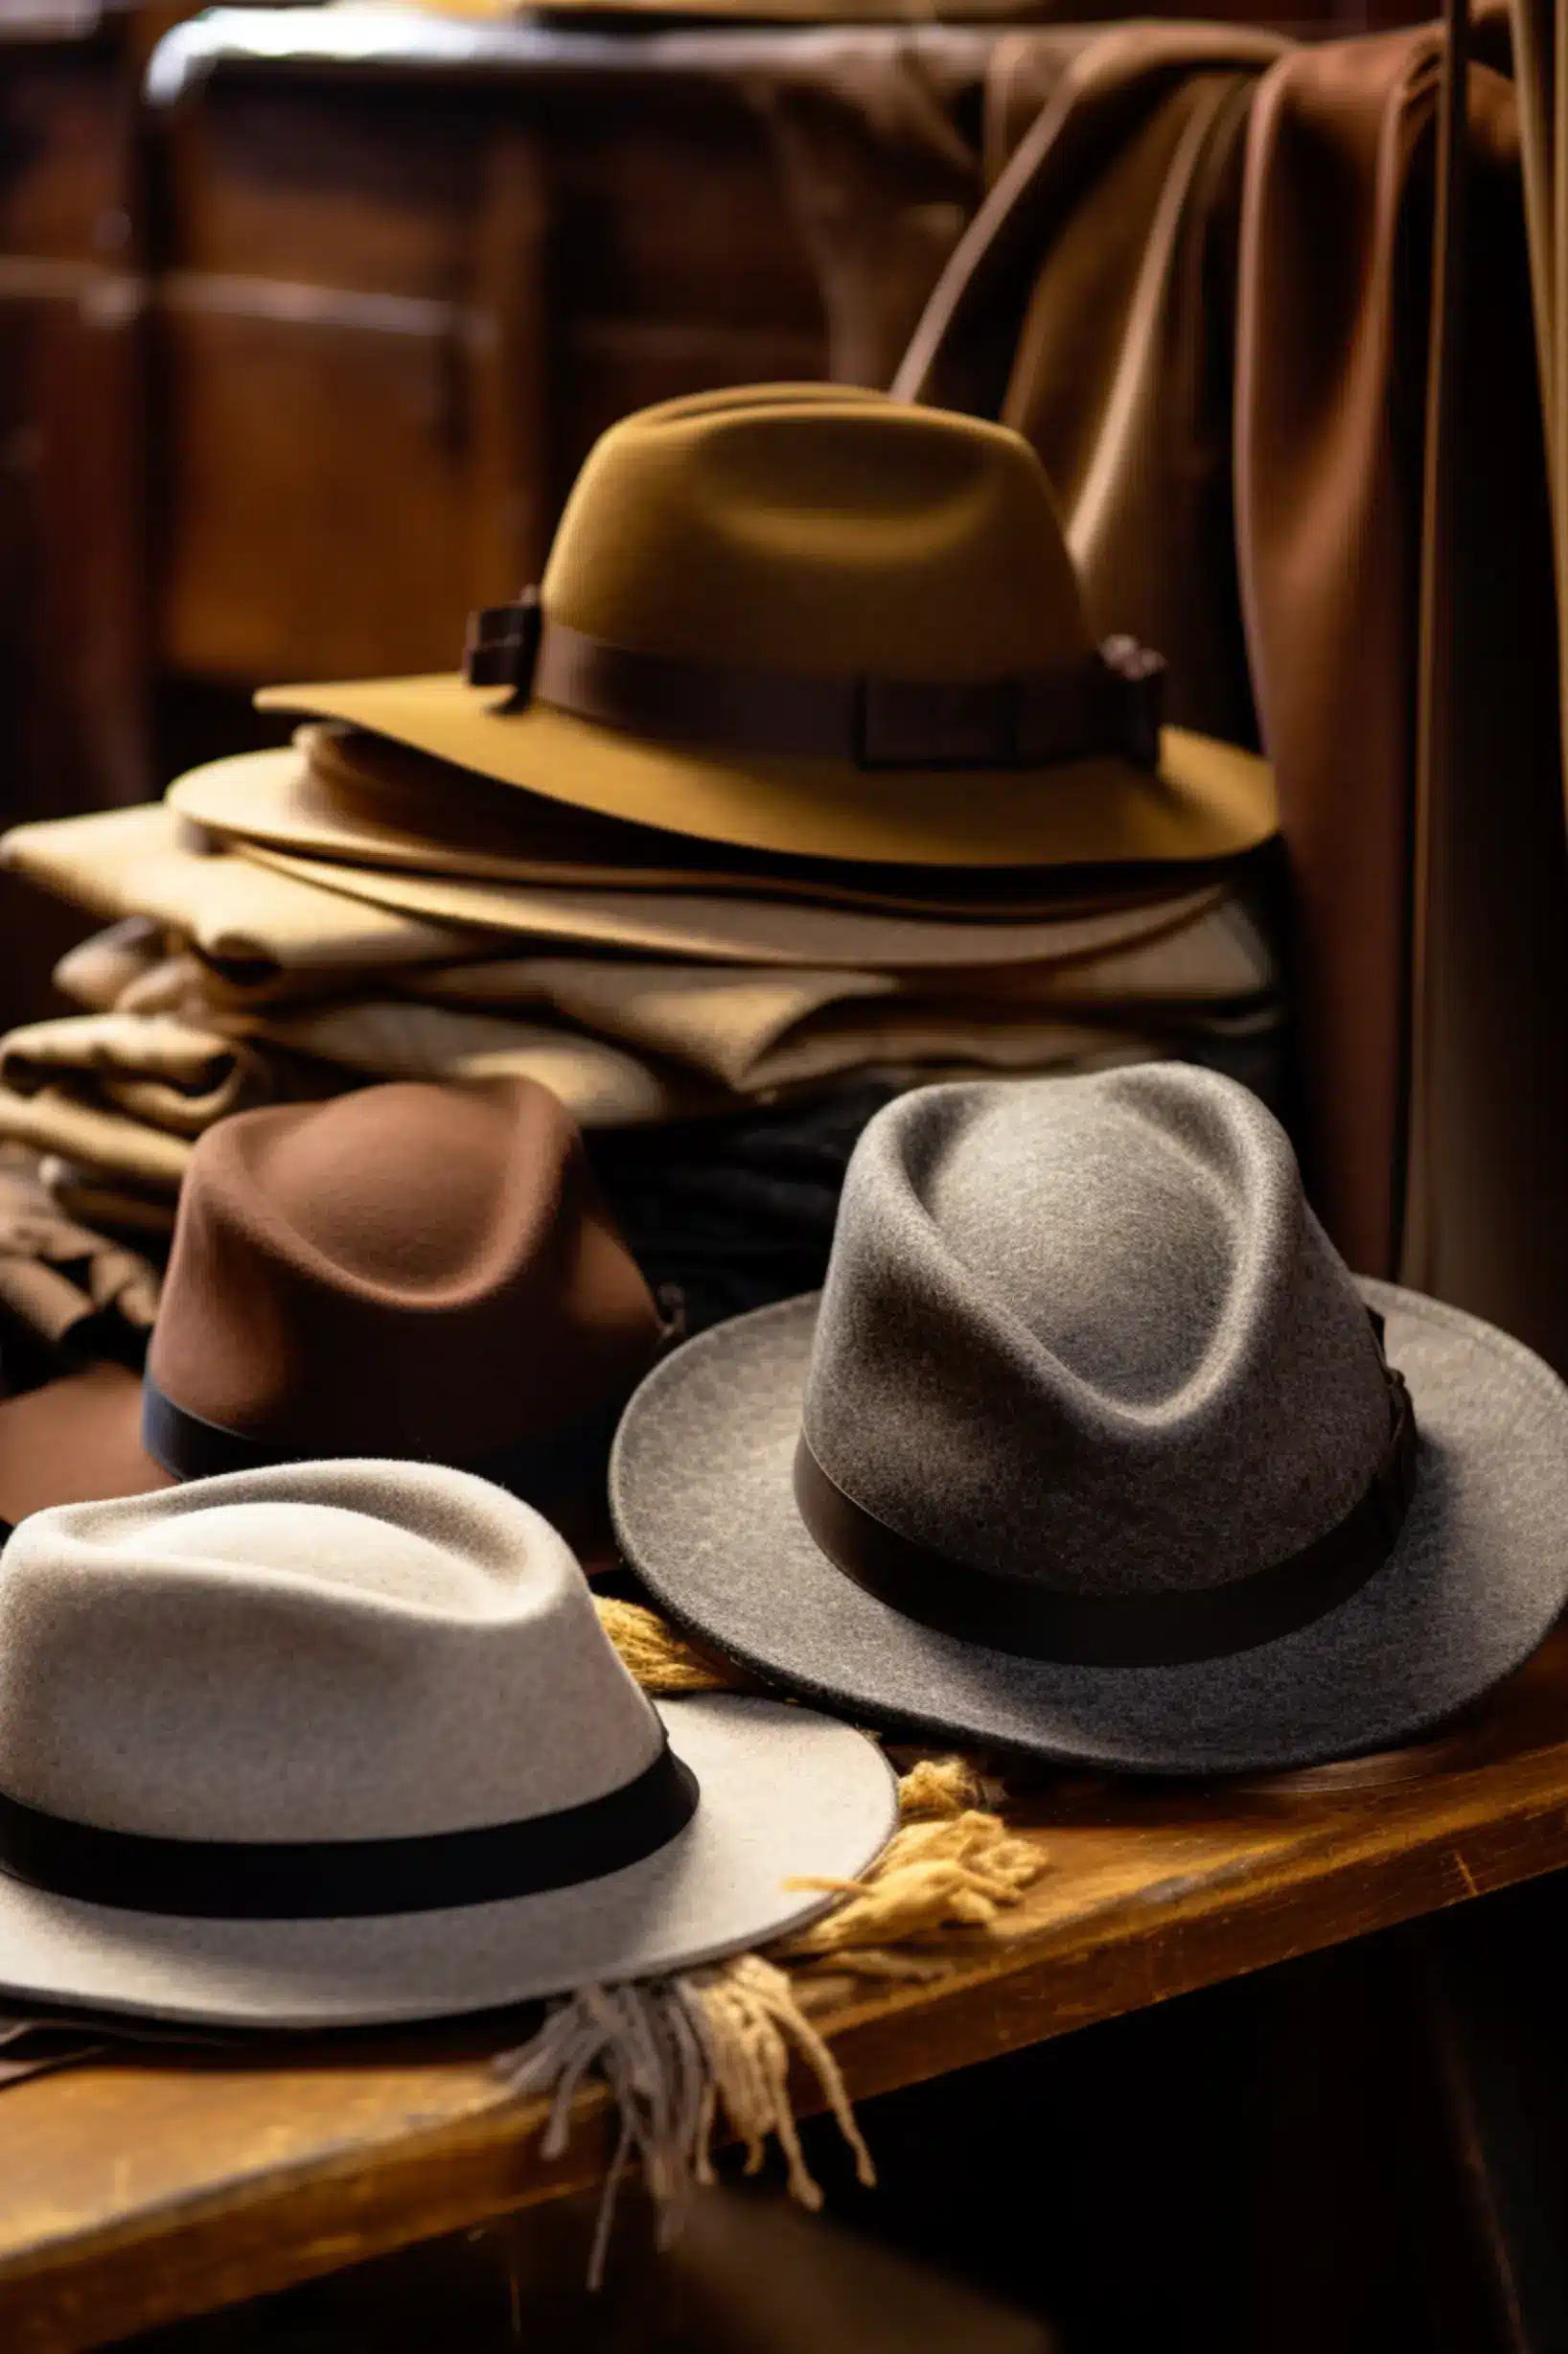 hats stacked on a table